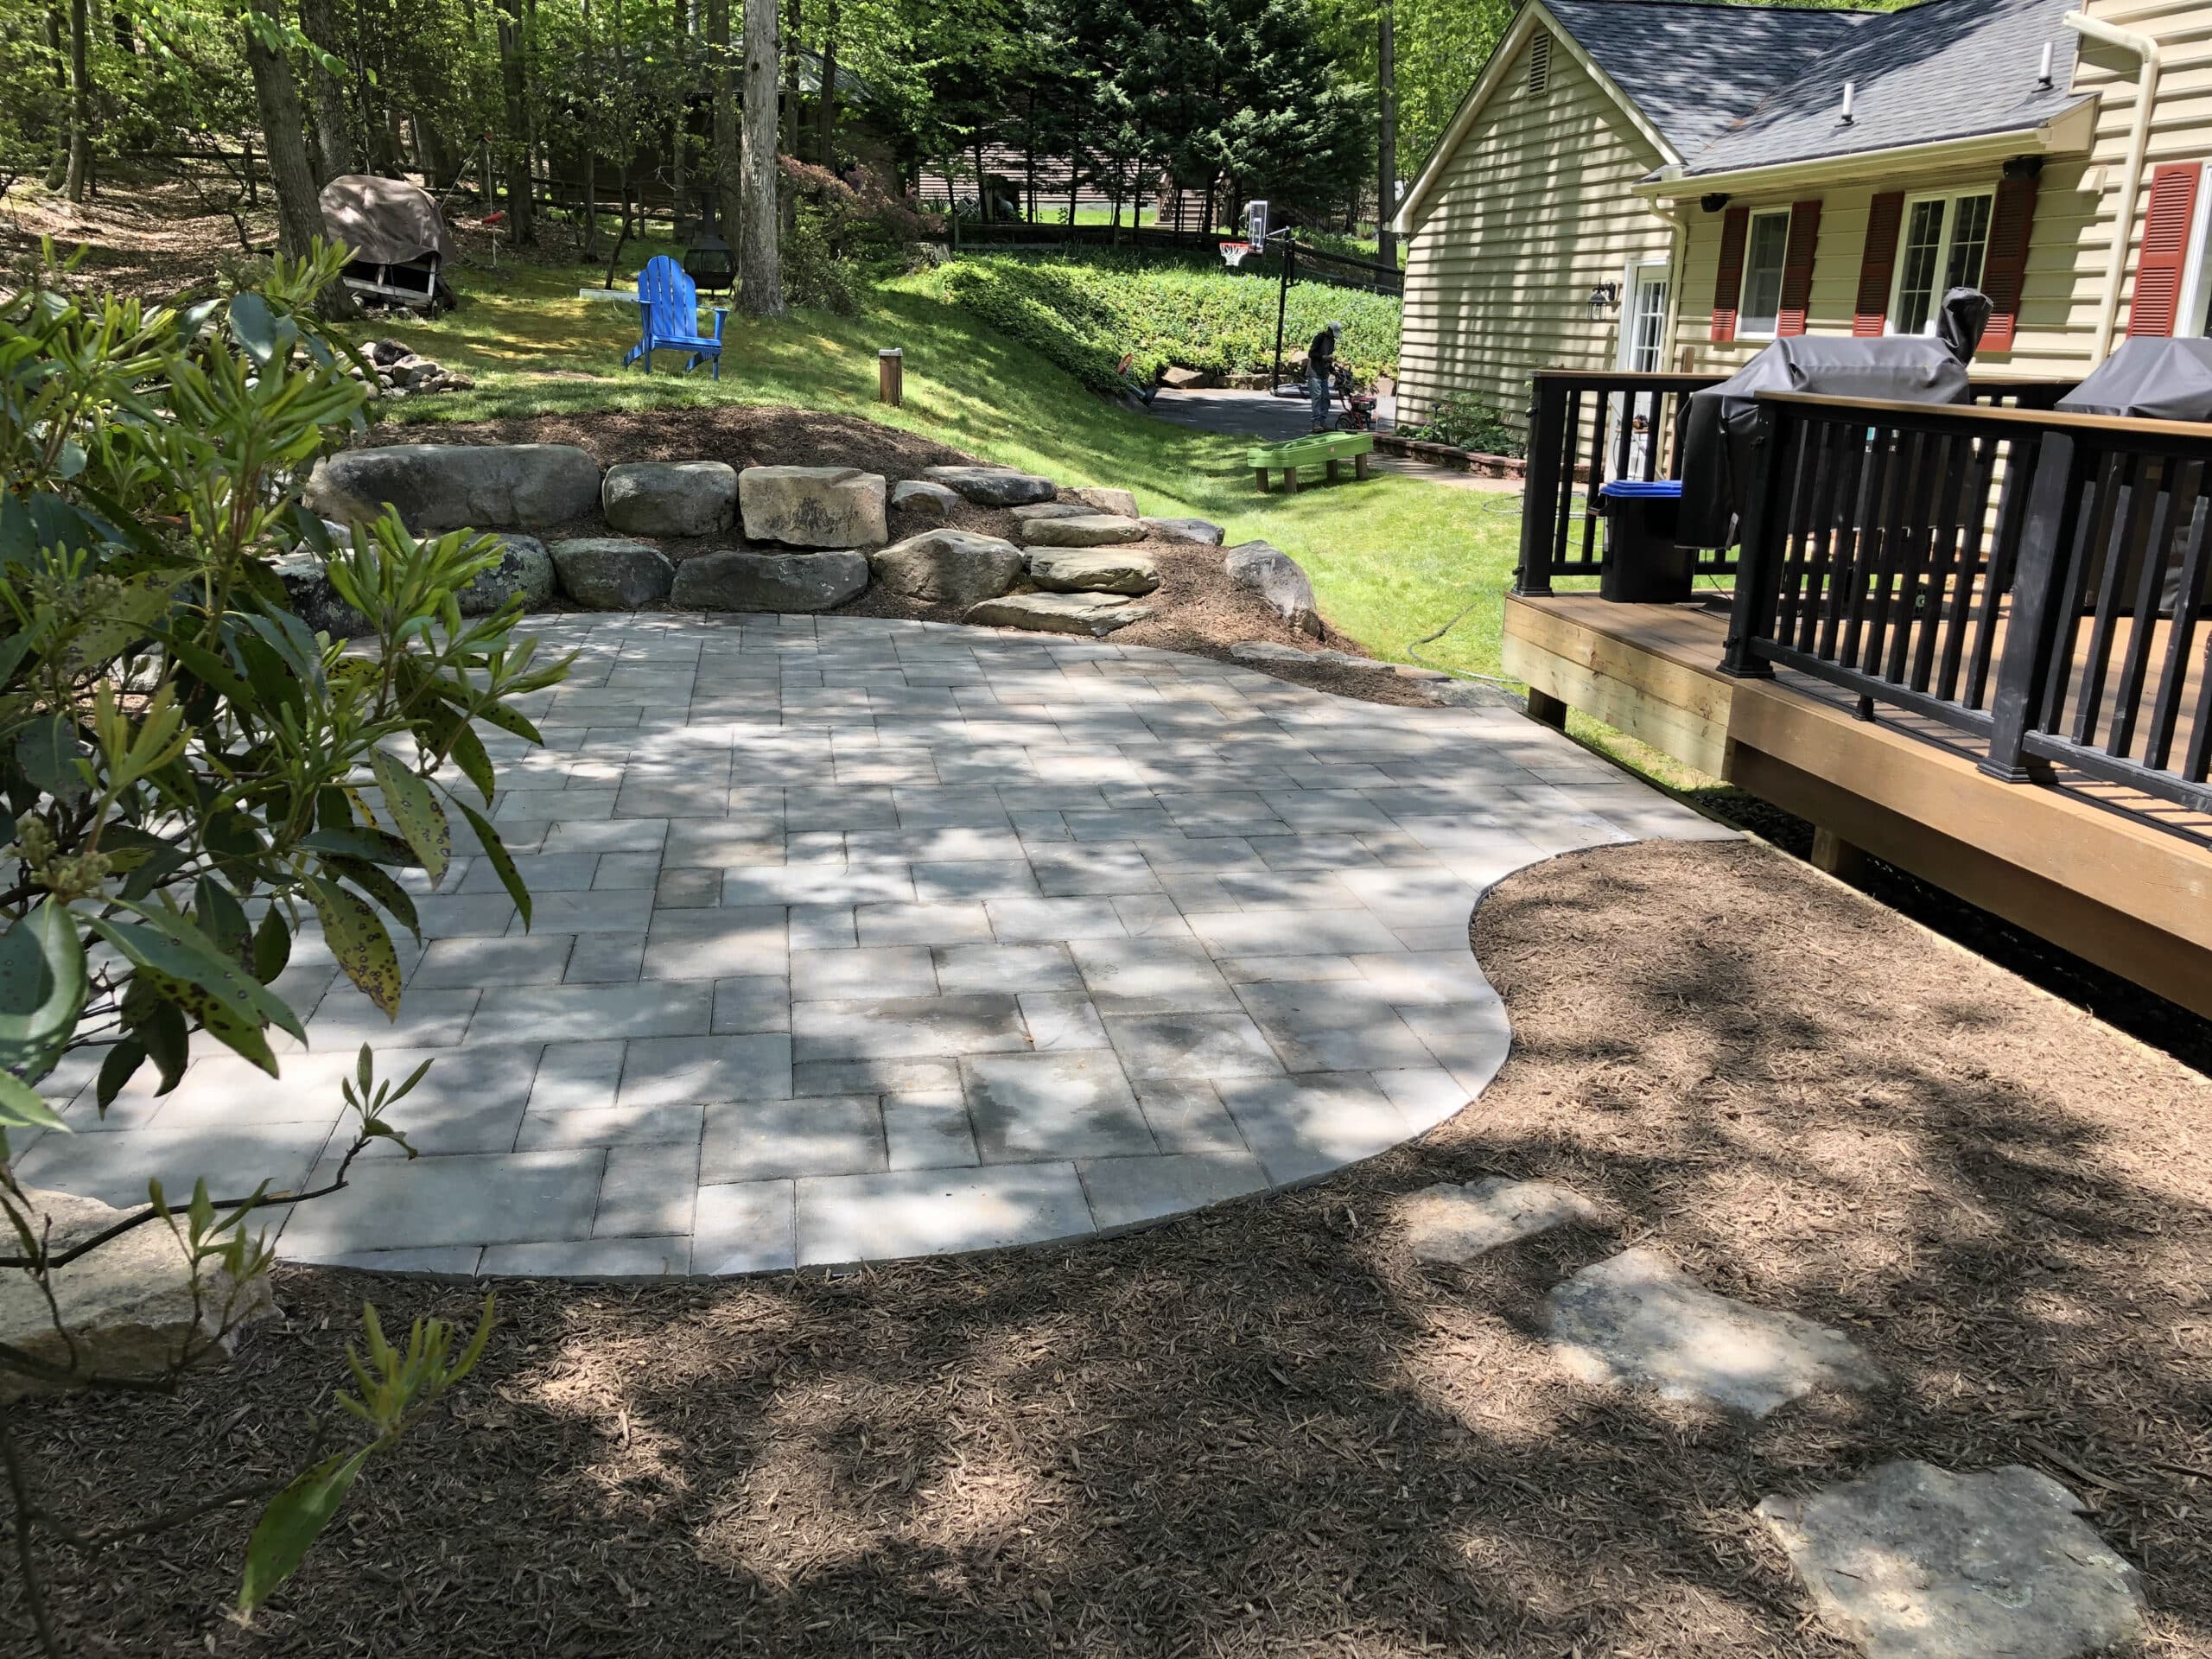 Flagstone Patio off Deck with Boulders